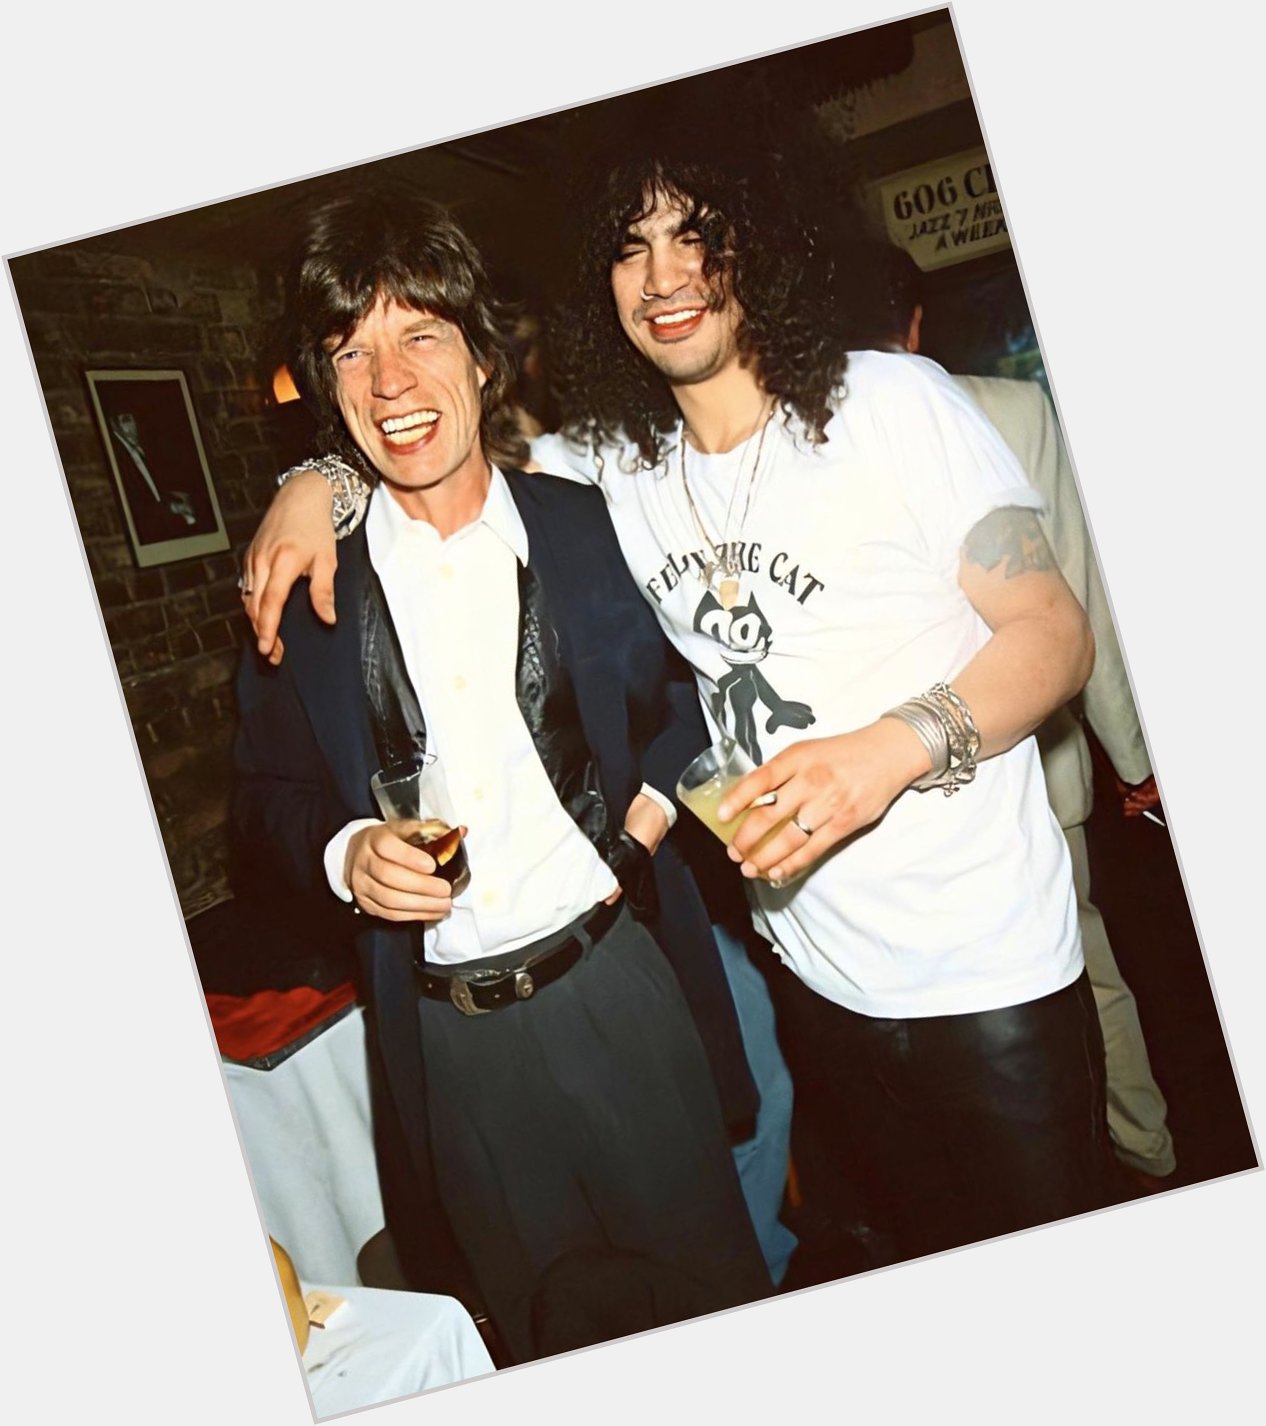 Happy Birthday Mick Jagger    : Credits to the owners    